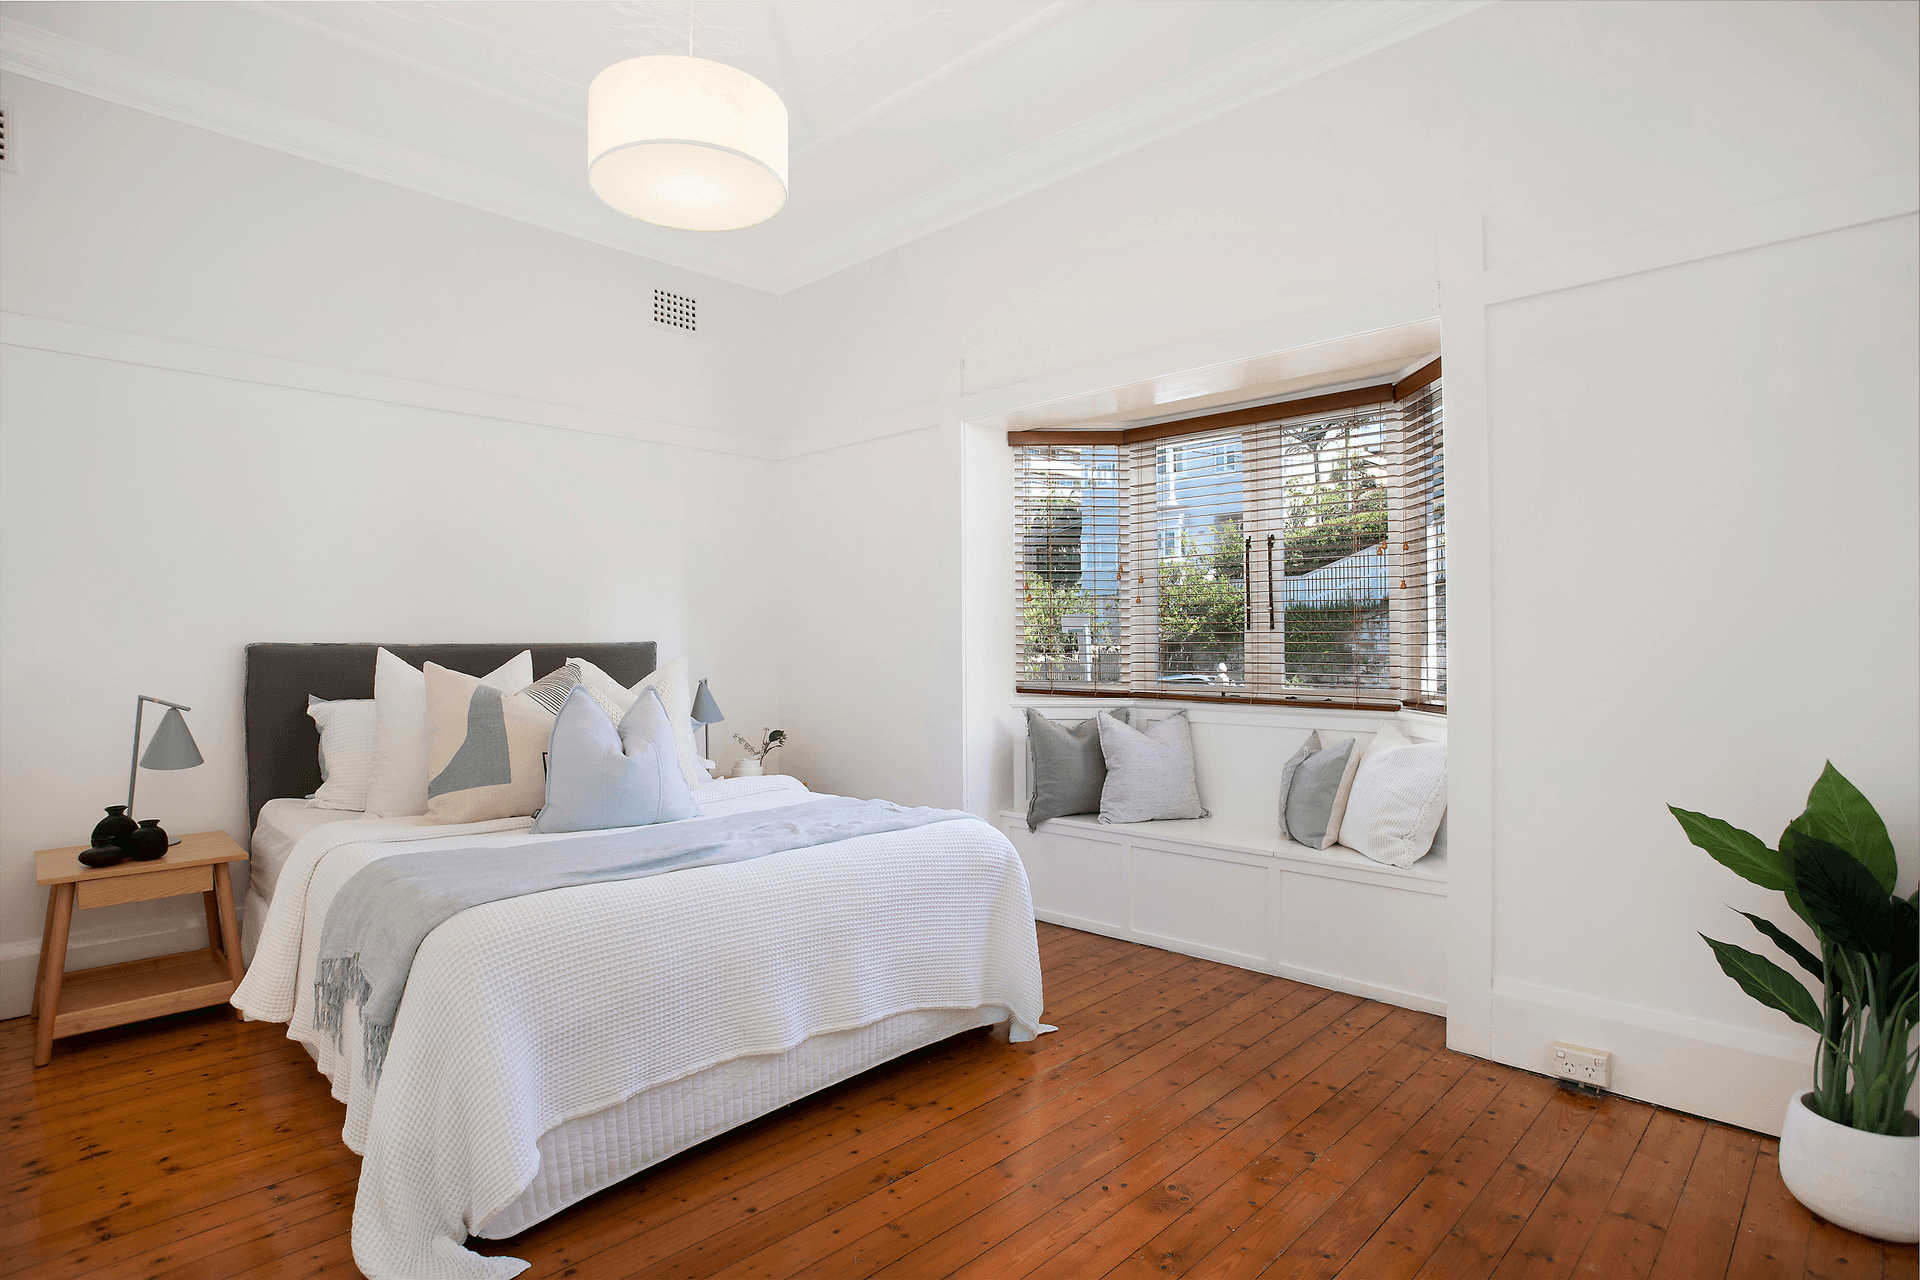 2/16 Quinton Road, Manly, NSW 2095